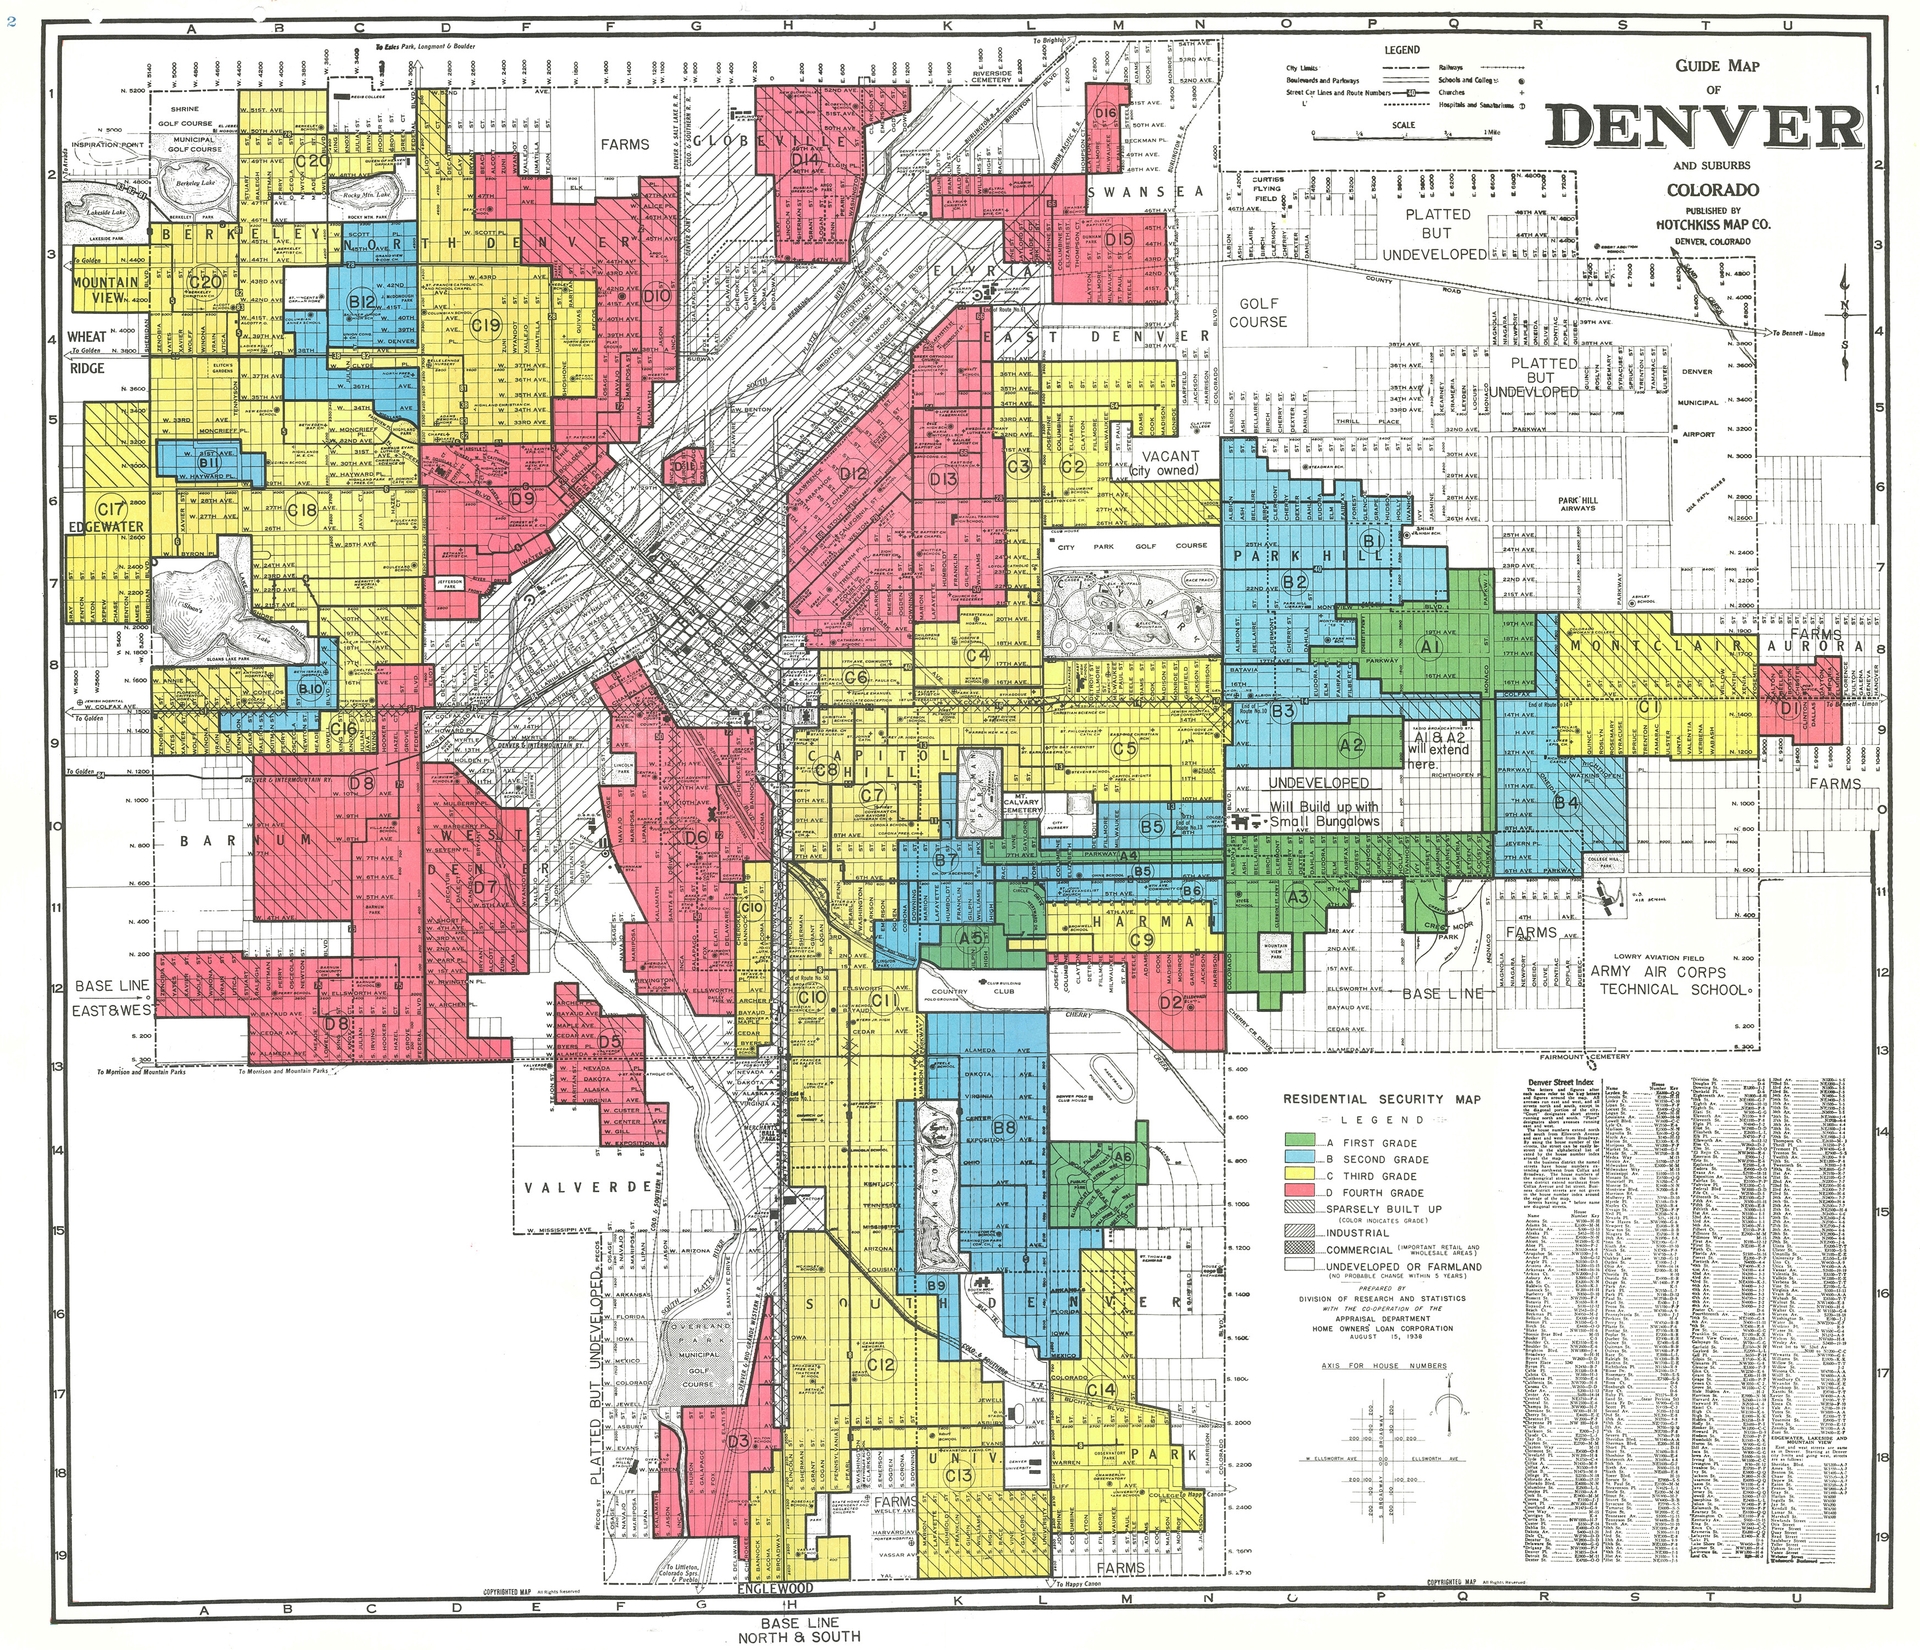 A Home Owners' Loan Corporation (HOLC) residential security map of Denver, Colorado.